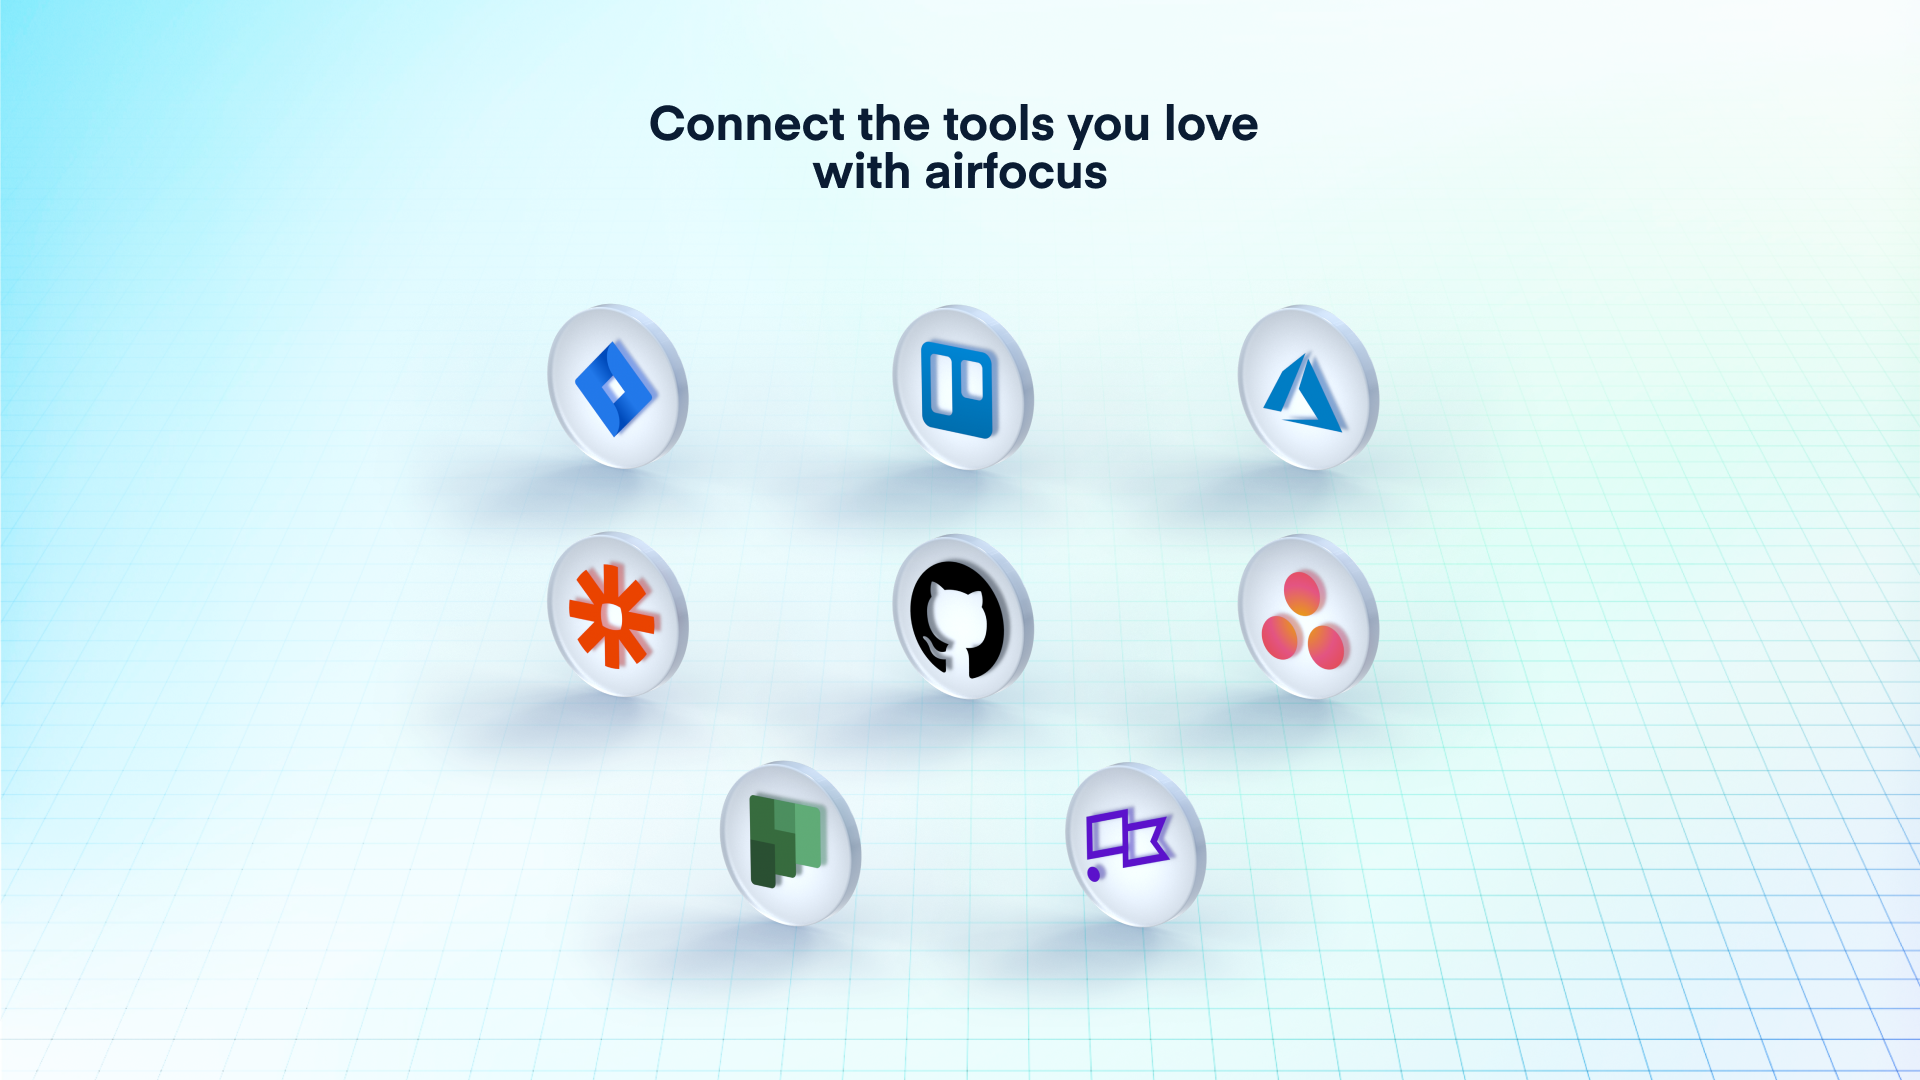 airfocus Software - Connect the tools you love  with airfocus.